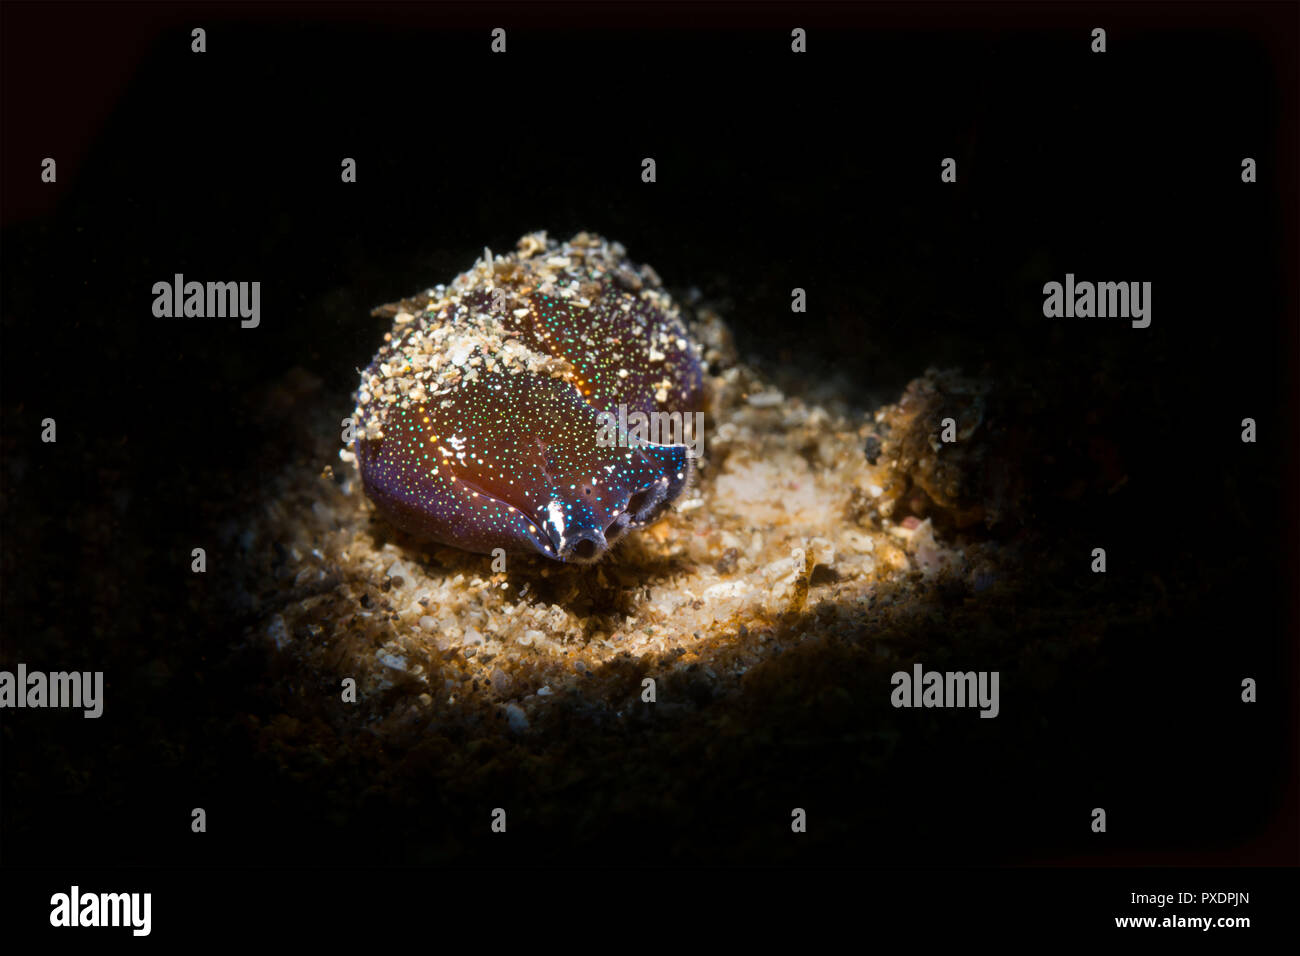 A viscous underwater nudibranch snail crawls along the sandy bottom looking for prey. Shot using a special light beam snoot. Stock Photo